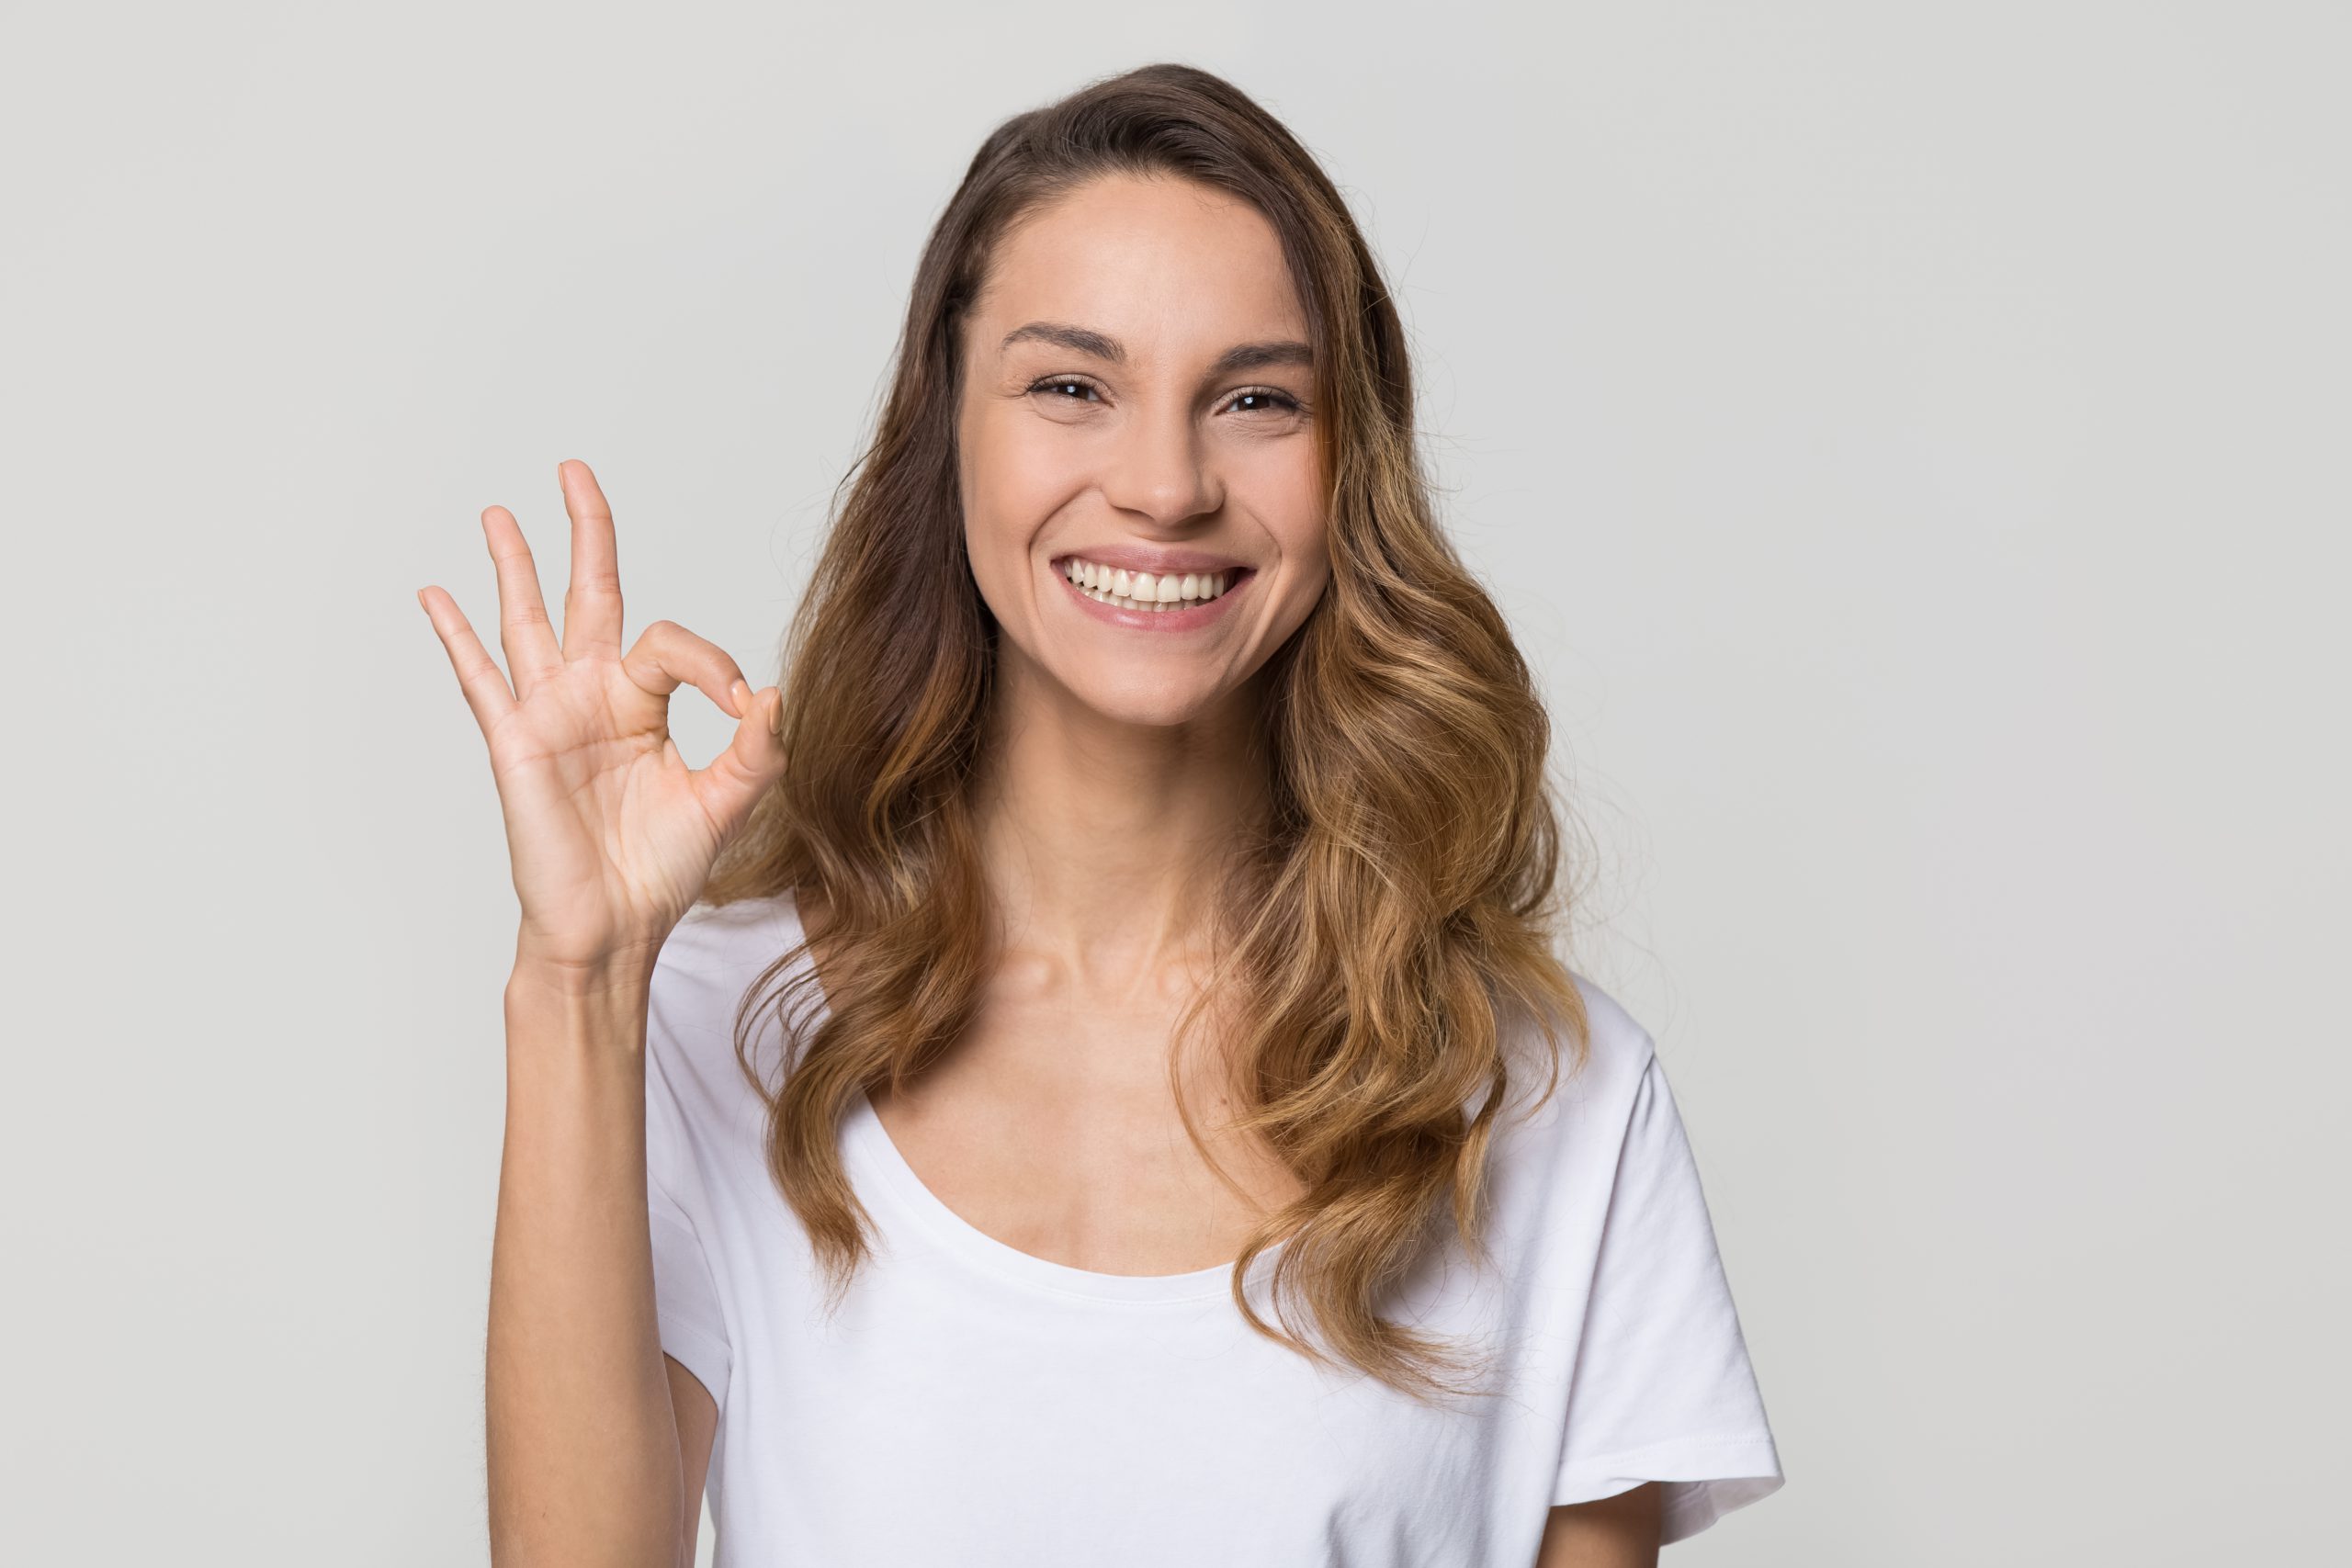 Happy woman gesturing ok smiling with white teeth looking at camera isolated on studio blank background, pretty girl hand showing okay sign satisfied with dental orthodontic service concept, portrait